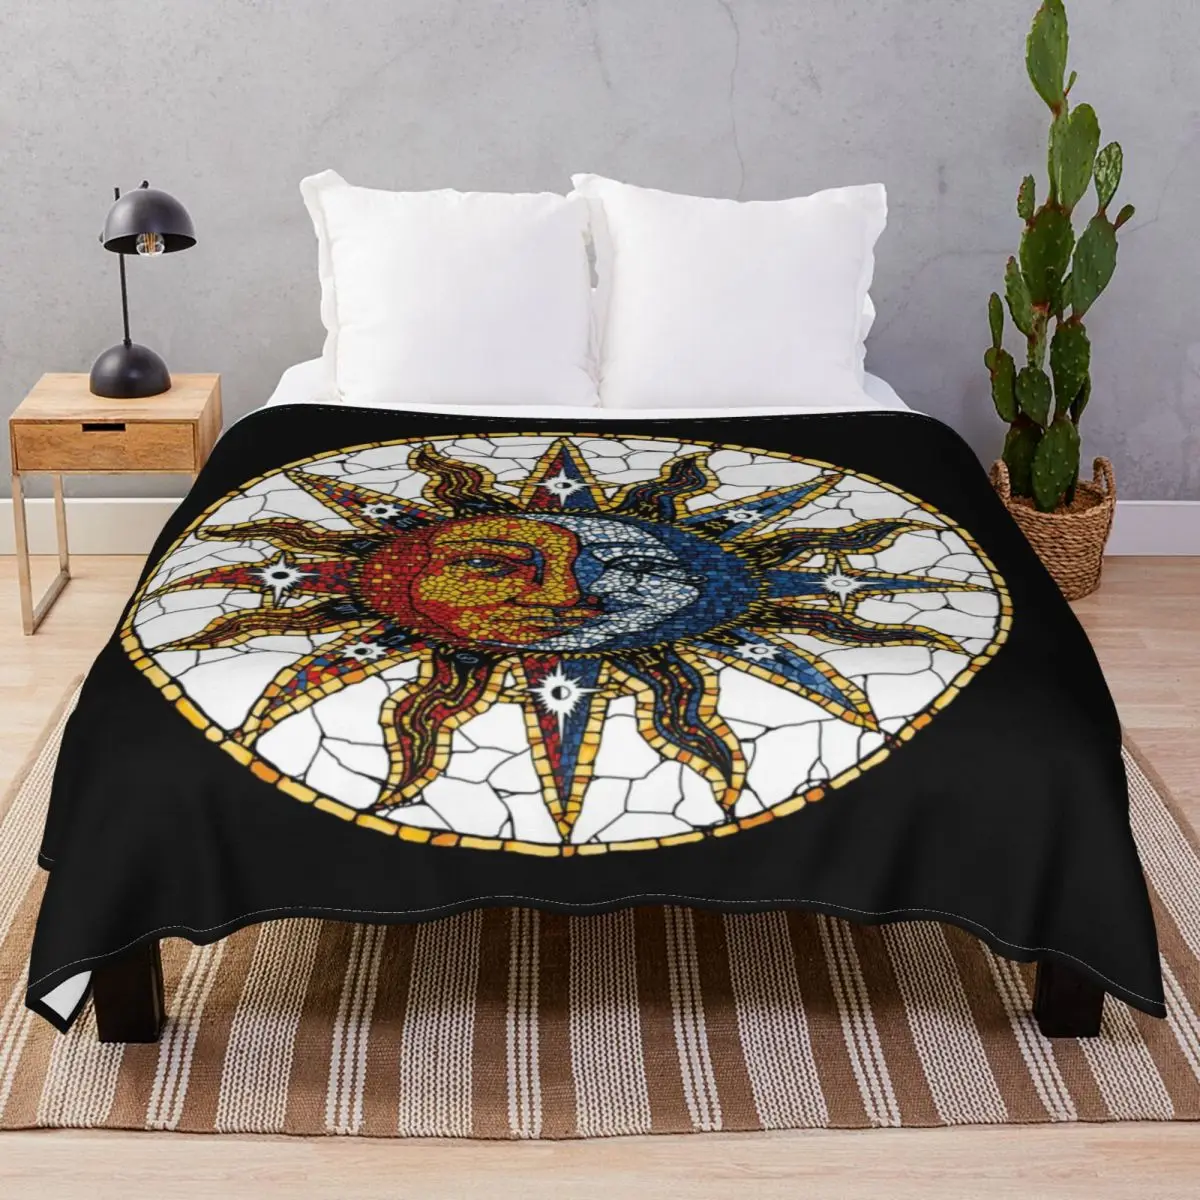 Mosaic Sun And Moon Blankets Fleece Autumn Lightweight Unisex Throw Blanket for Bed Home Couch Travel Cinema